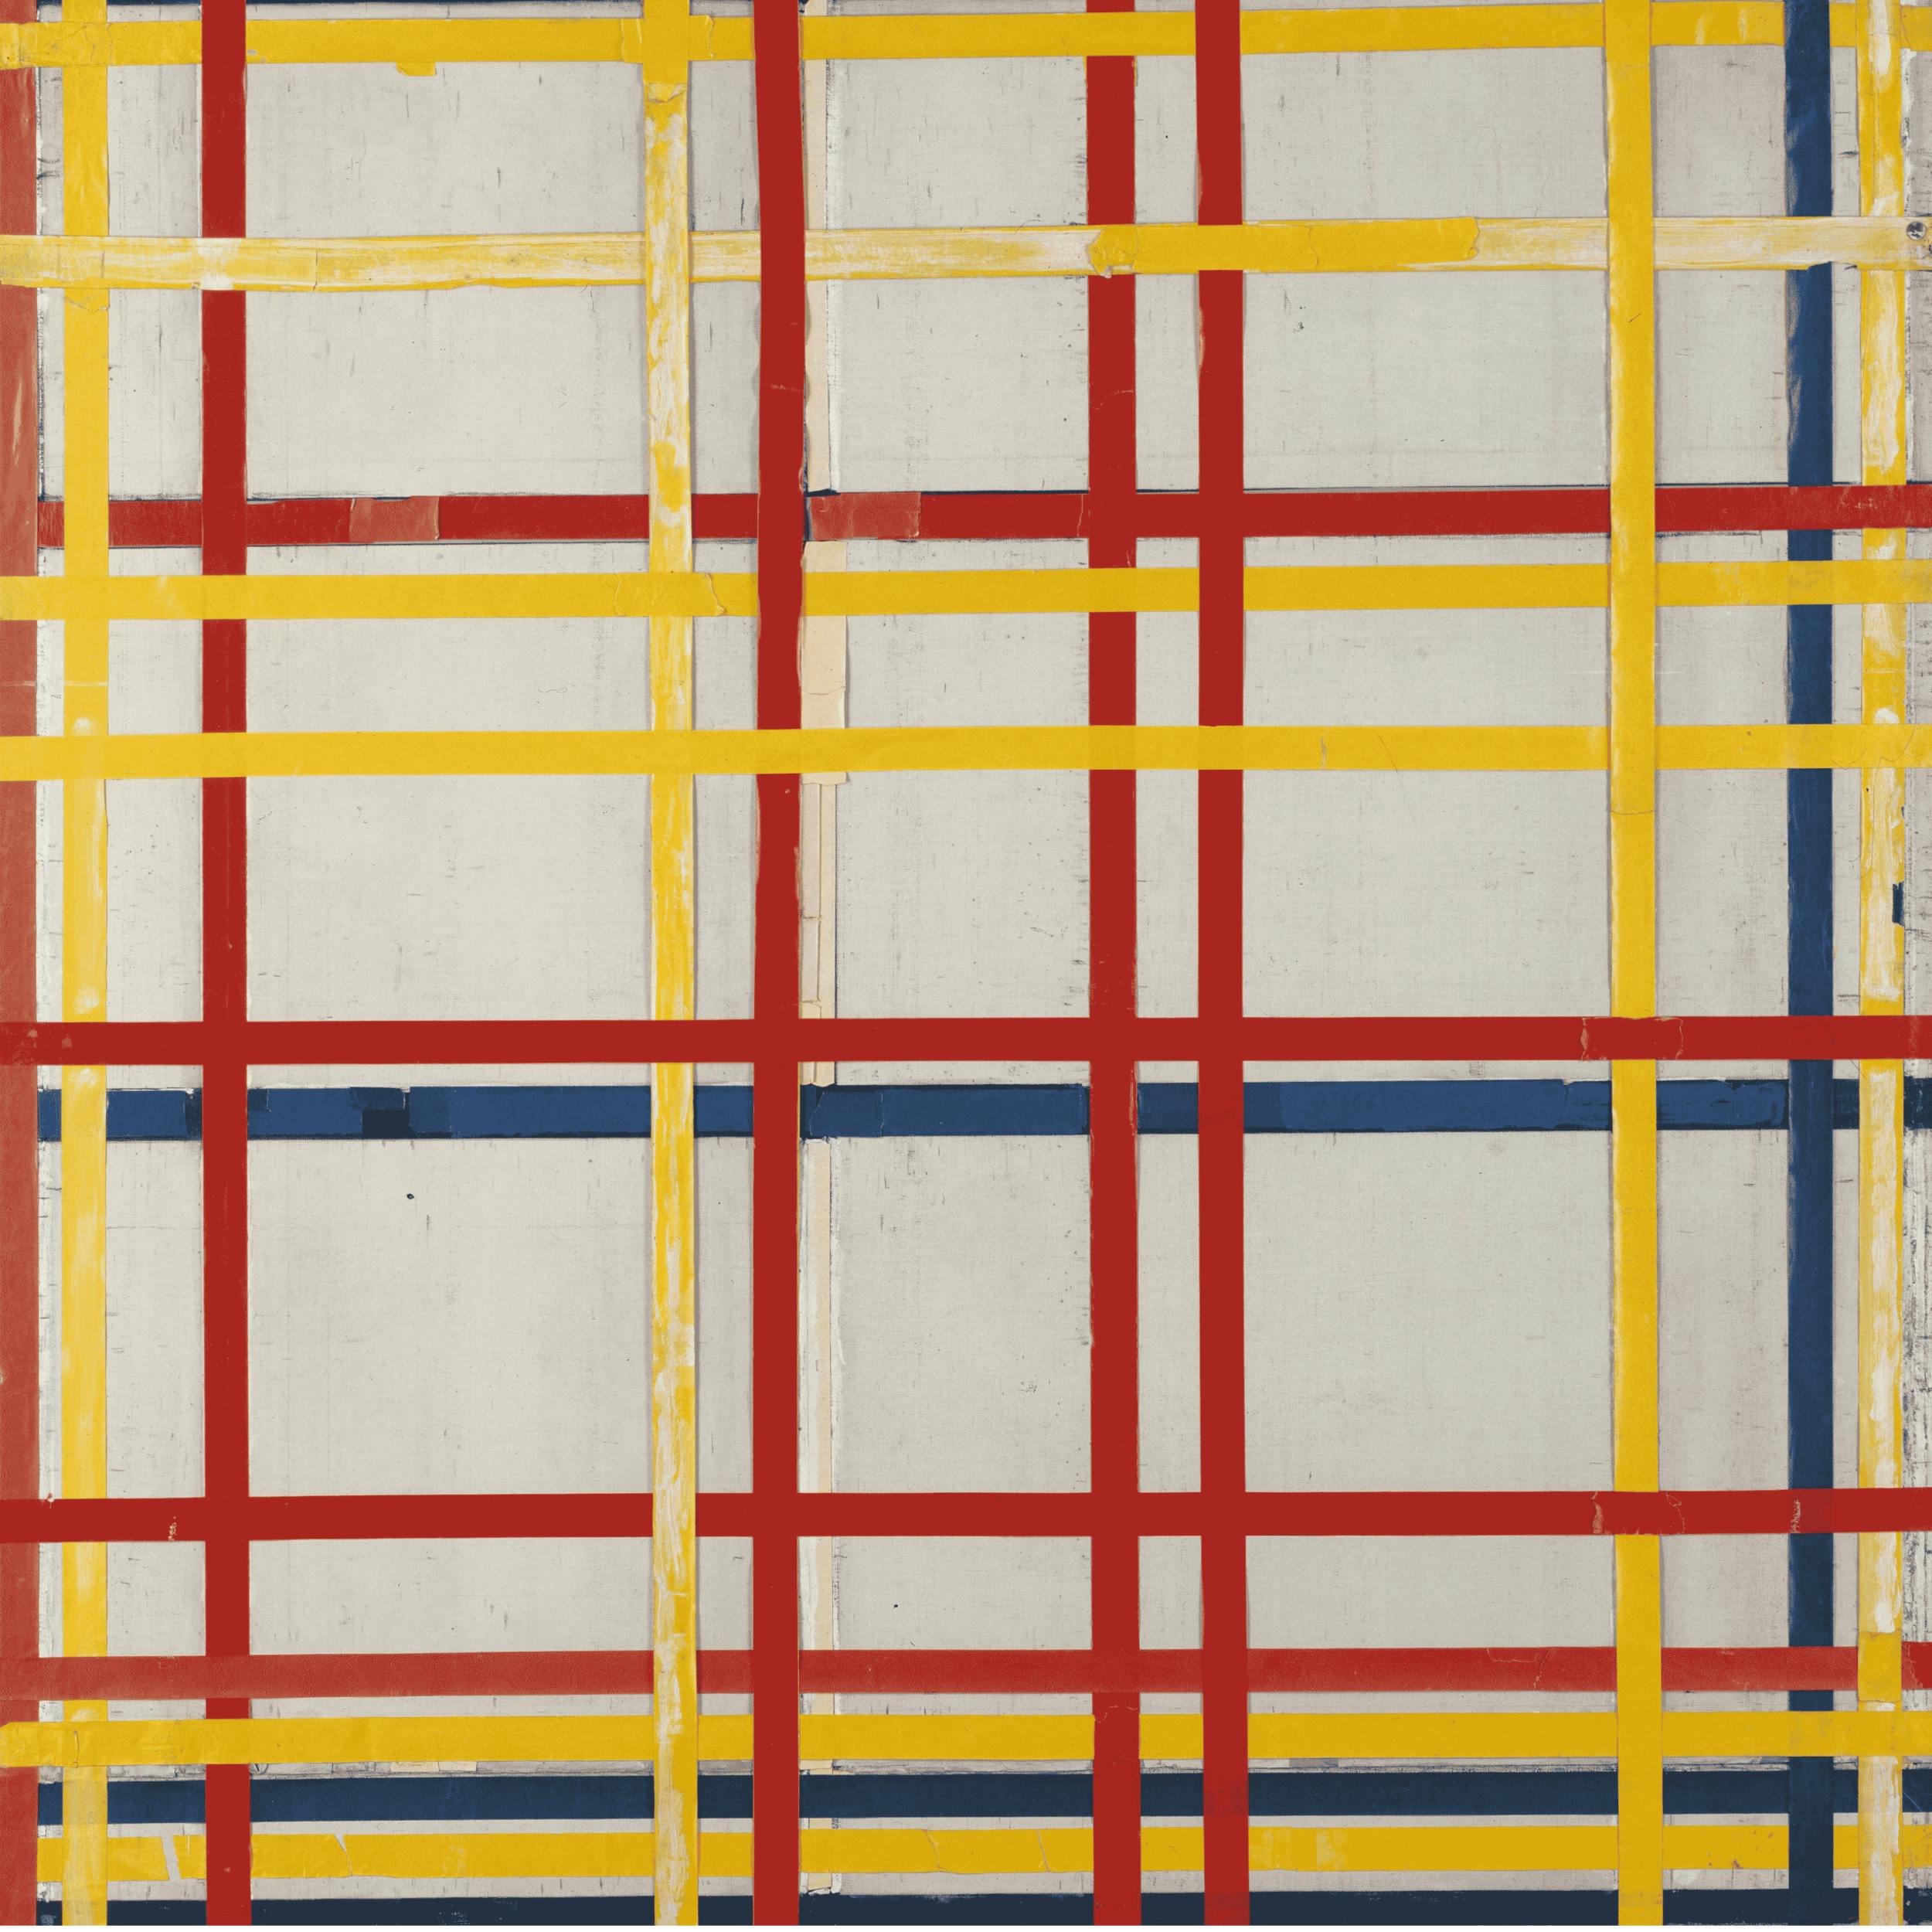 Mondrian, Neoplasticism and the Upside Down Artwork